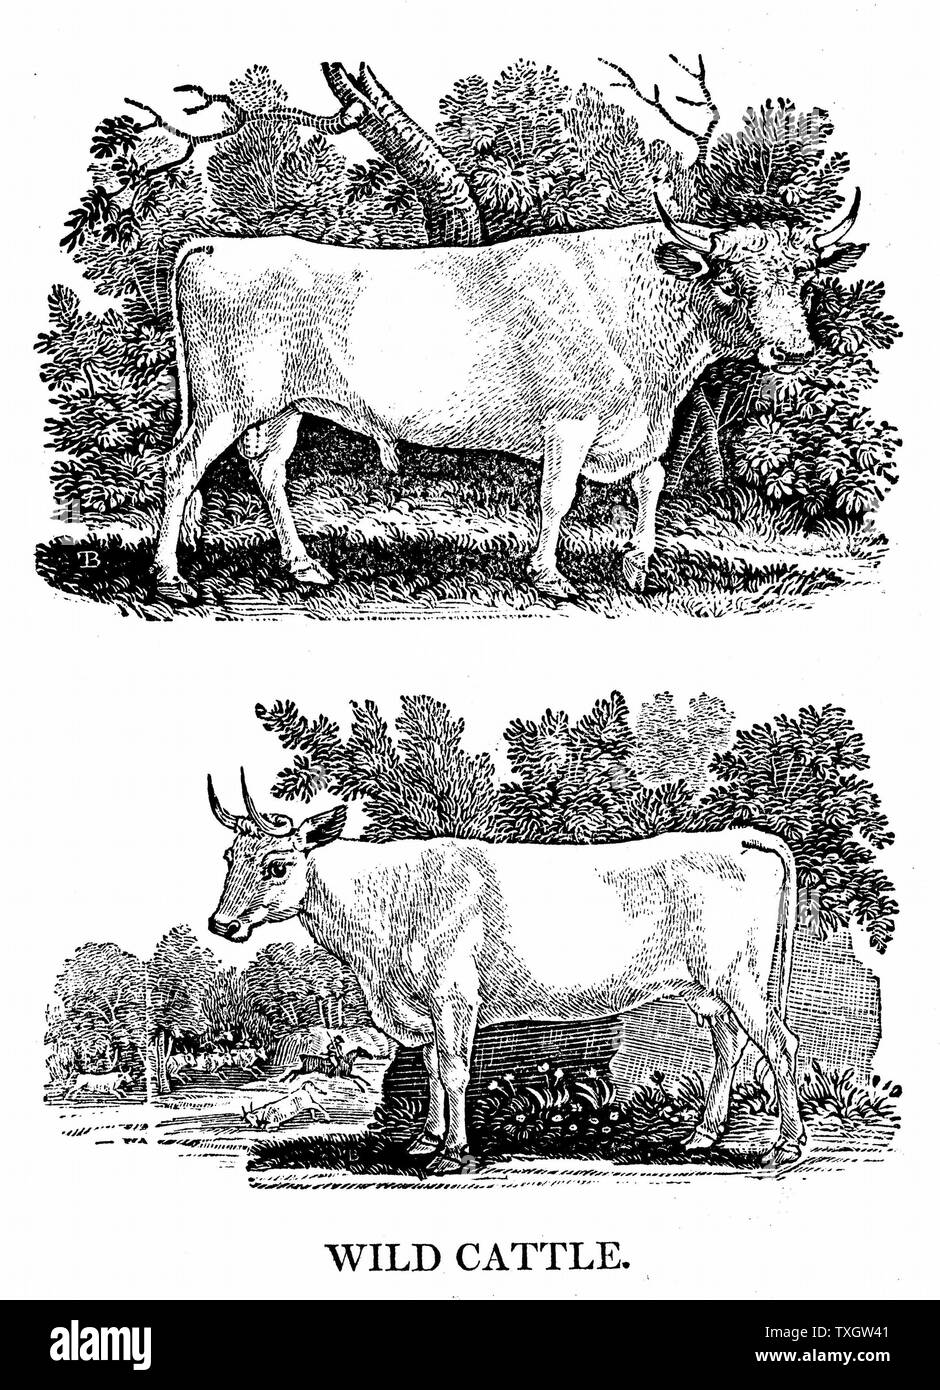 British Wild  or Park Cattle From Thomas Bewick 'A General History of Quadrupeds', Newcastle-upon-Tyne, 1790.  Ancient breed surviving in a few small herds in Britain through having been enparked centuries ago. Bull and cow Wood engraving Stock Photo